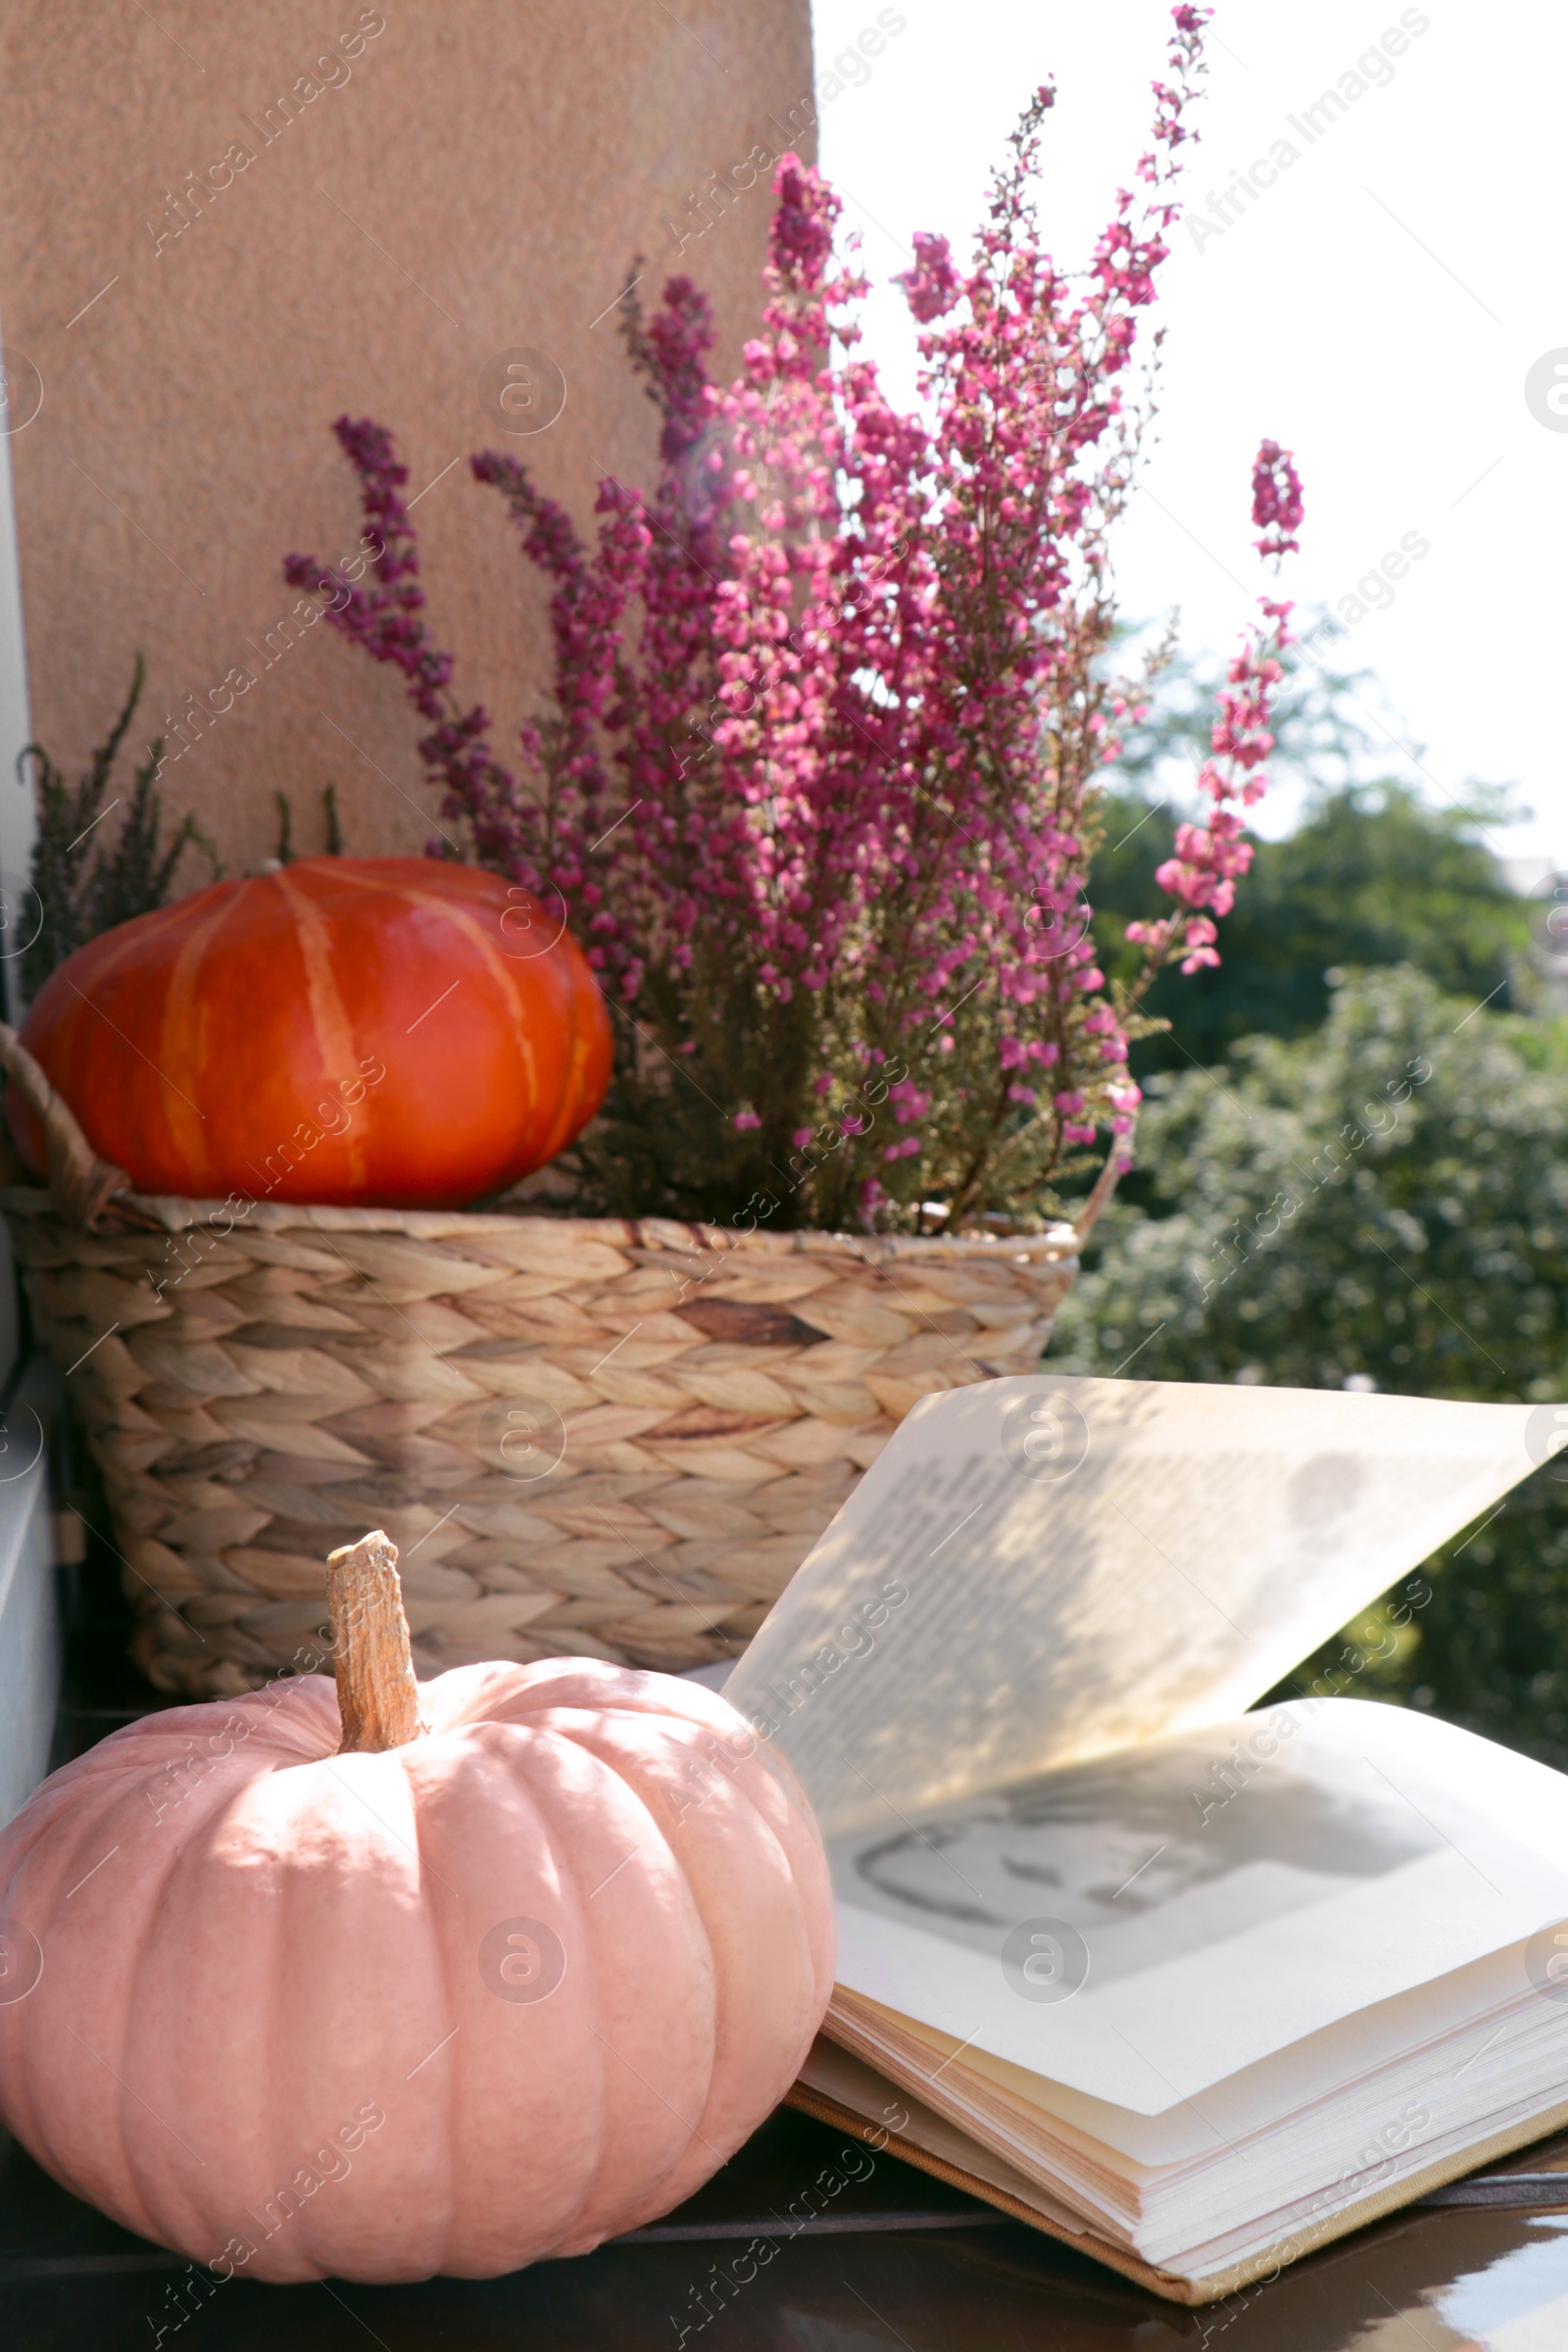 Photo of Wicker basket with beautiful heather flowers, pumpkins and open book on windowsill outdoors